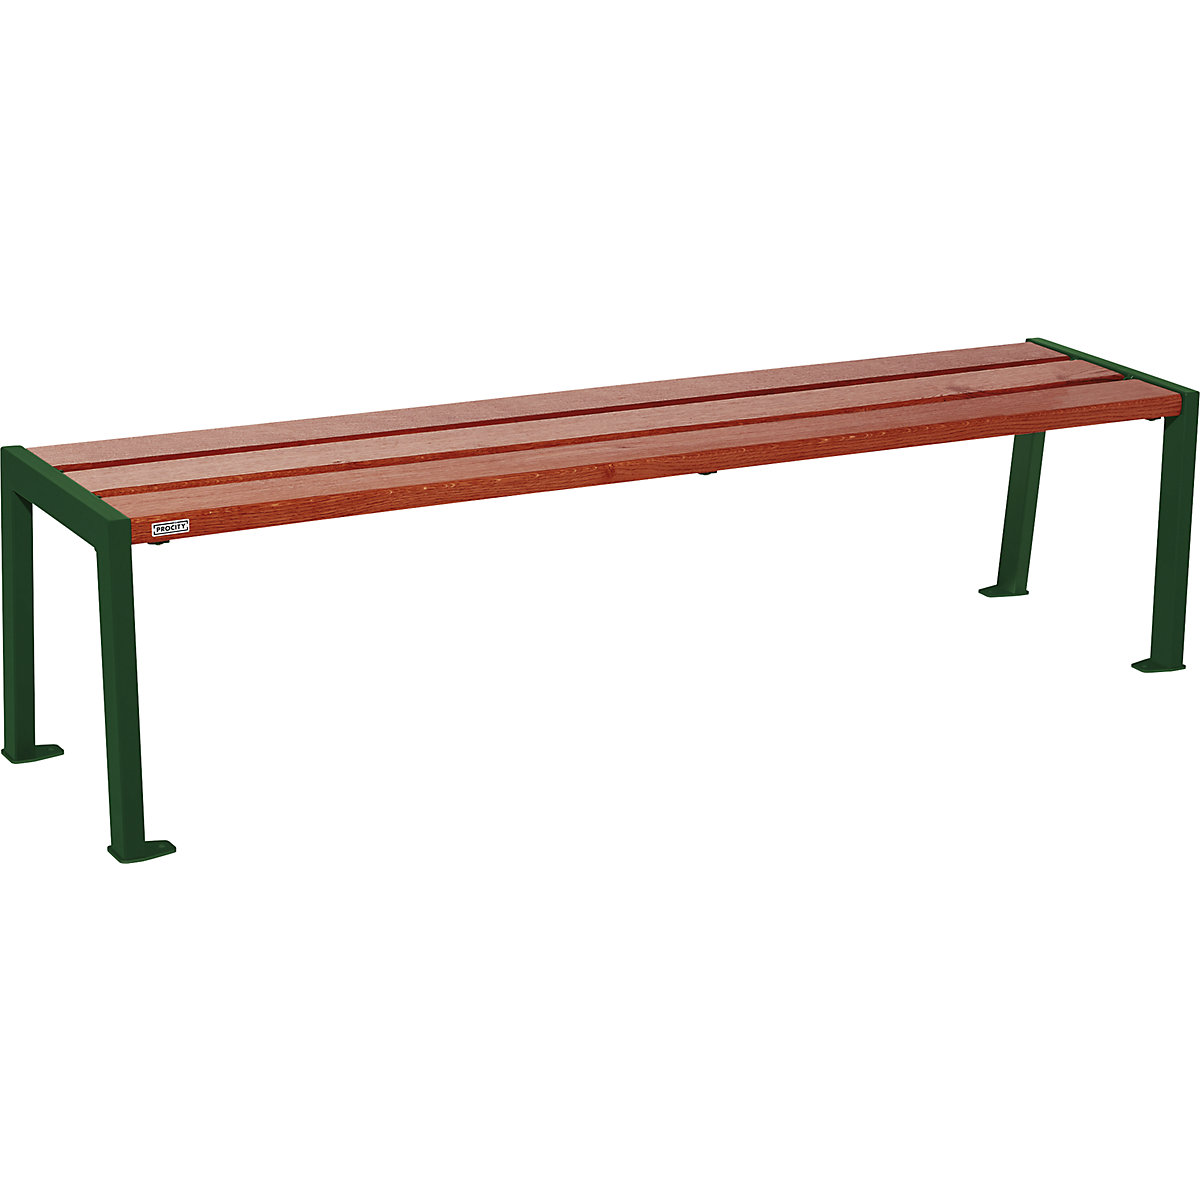 SILAOS® wooden bench without back rest – PROCITY, height 437 mm, length 1800 mm, moss green, mahogany-5